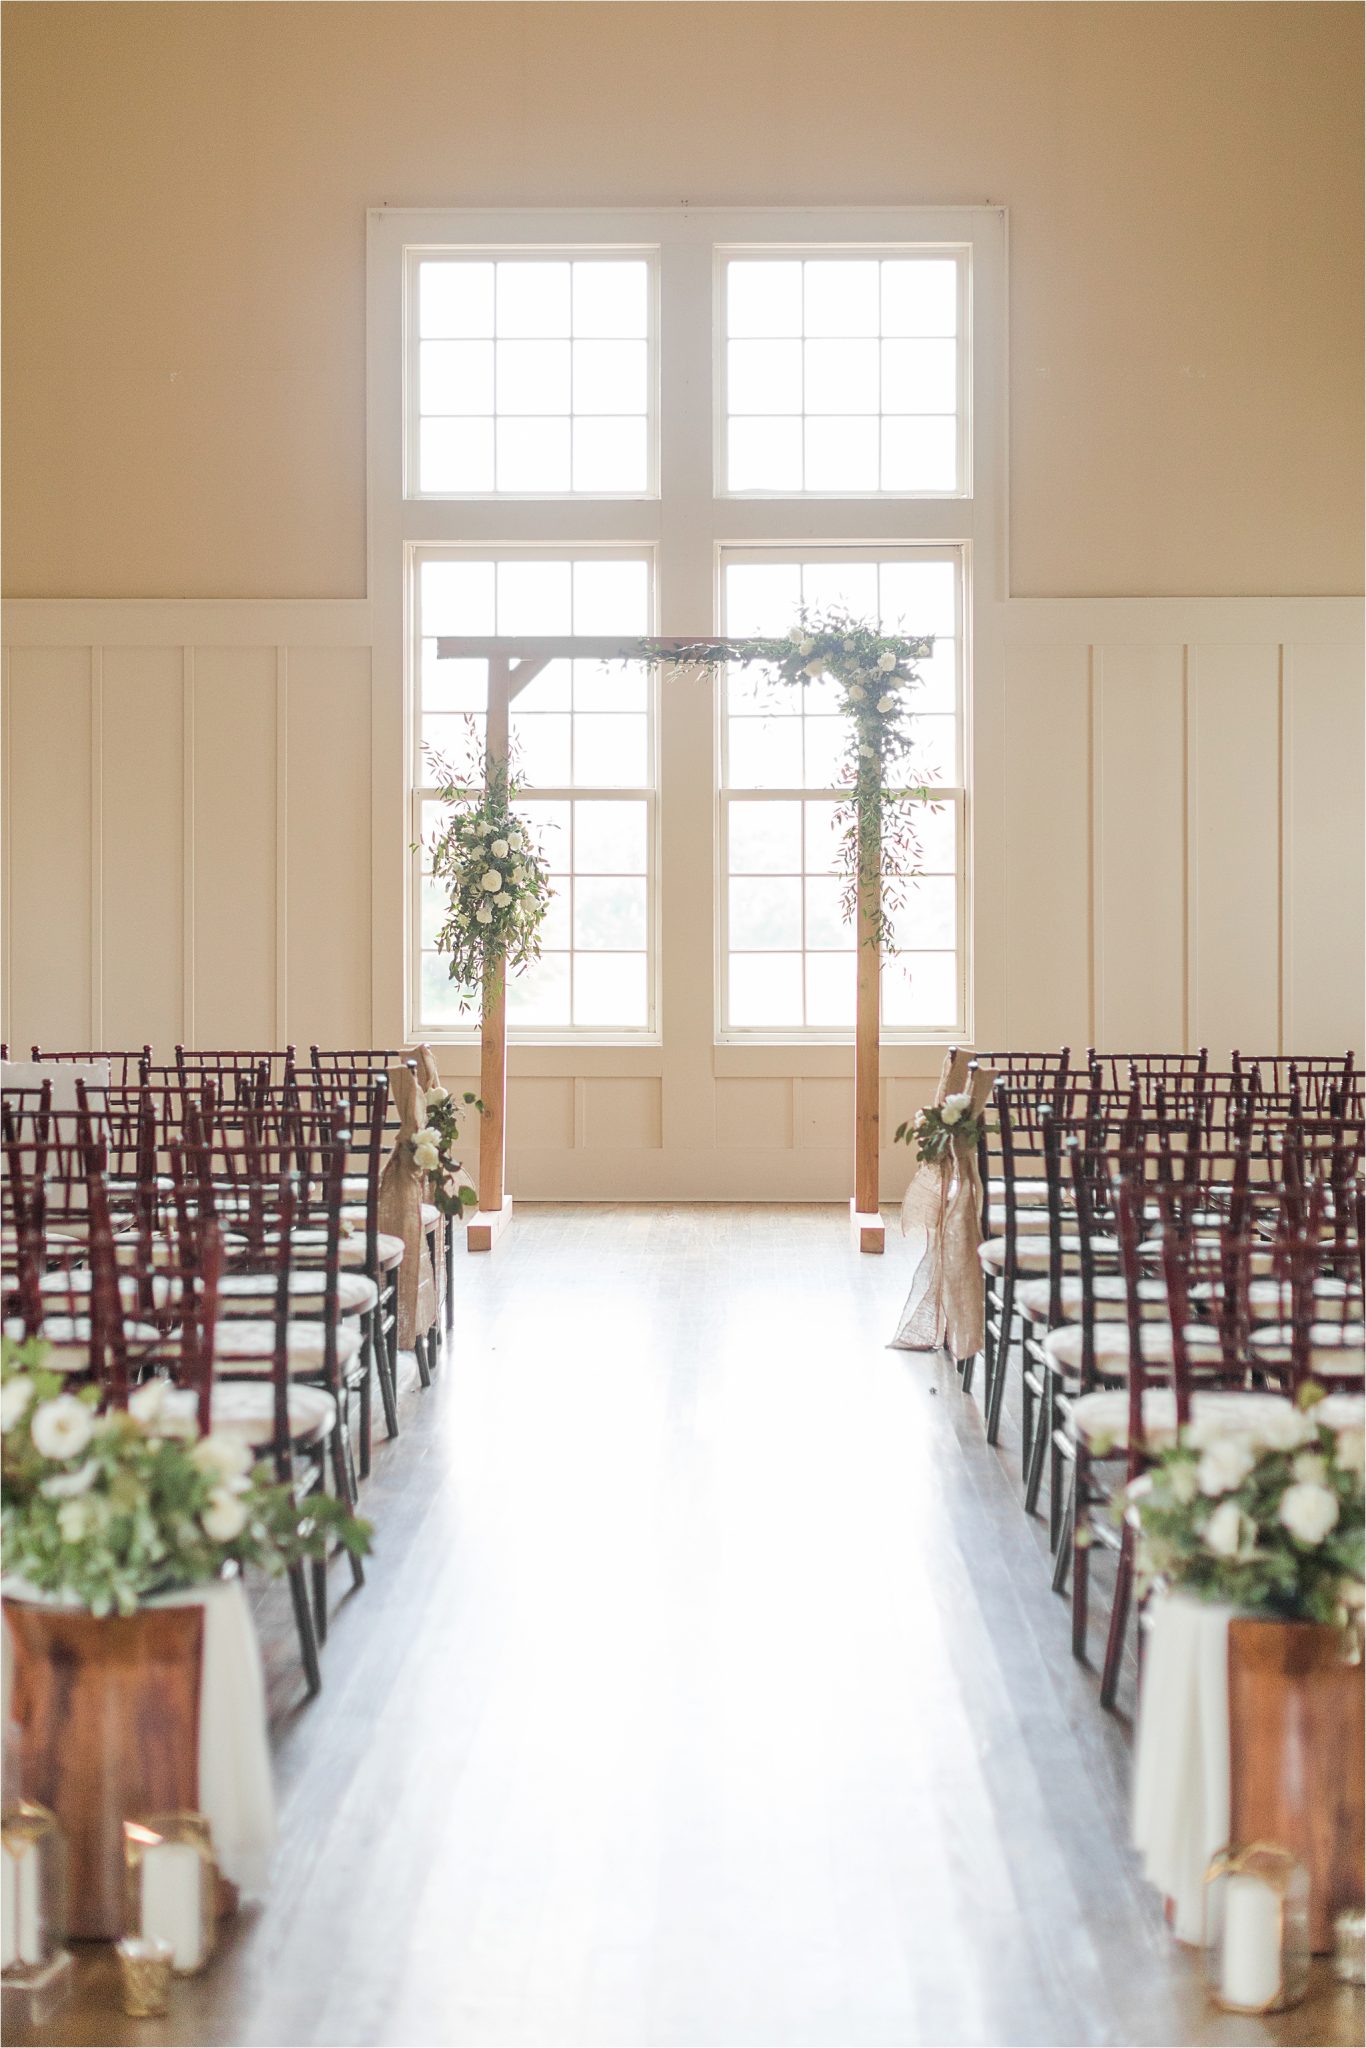 Pastel Themed Wedding-The Chapel at the Waters-Montgomery Alabama Photographer-Miles & Meredyth-Blue Themed Wedding-Alabama Wedding Venue-Wedding Details